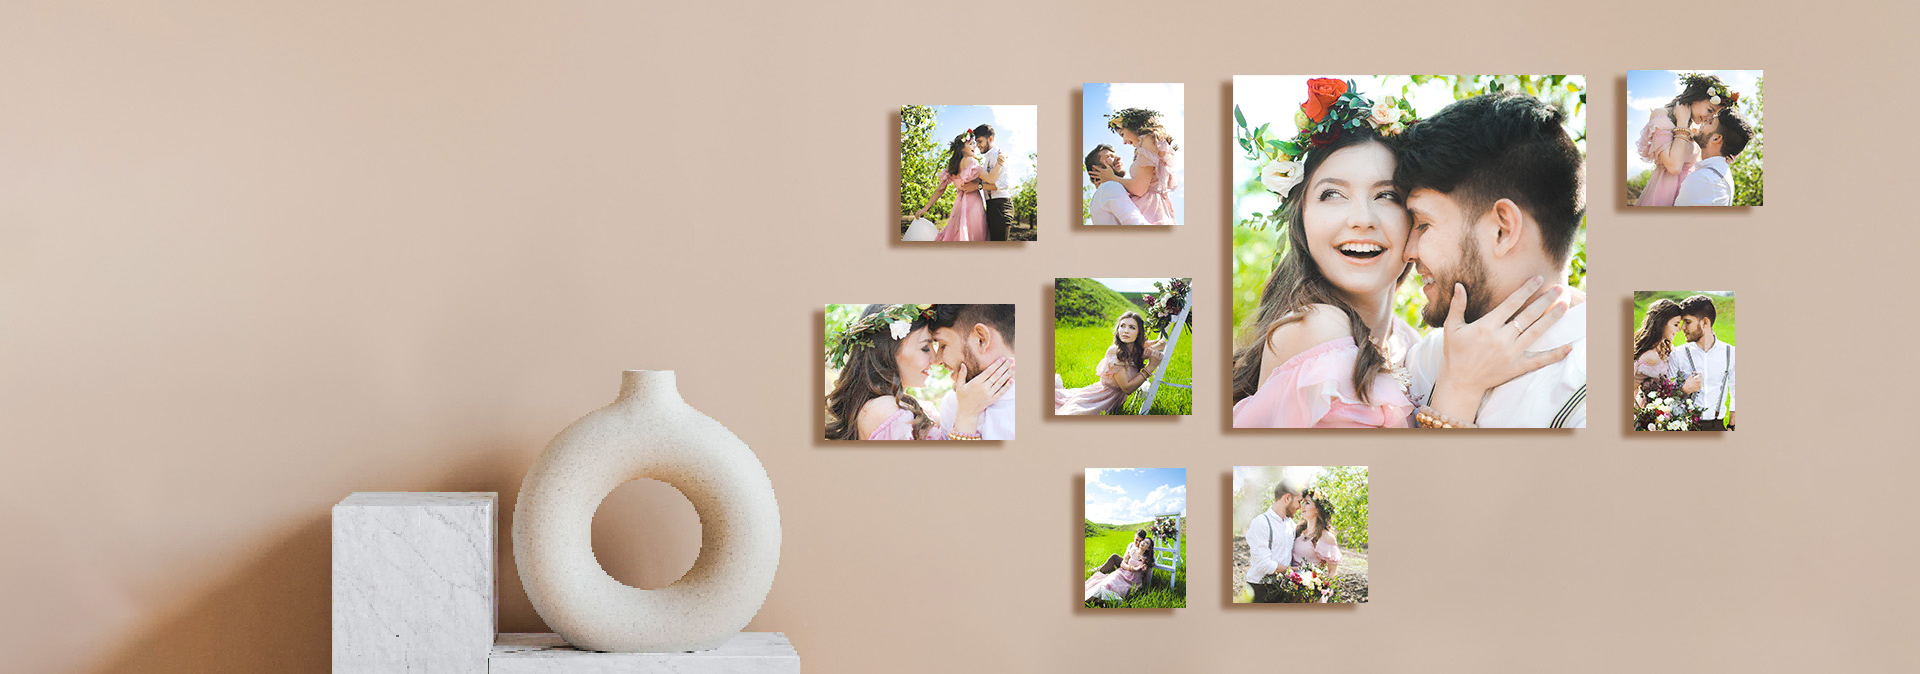 phototiles in different positions in a room